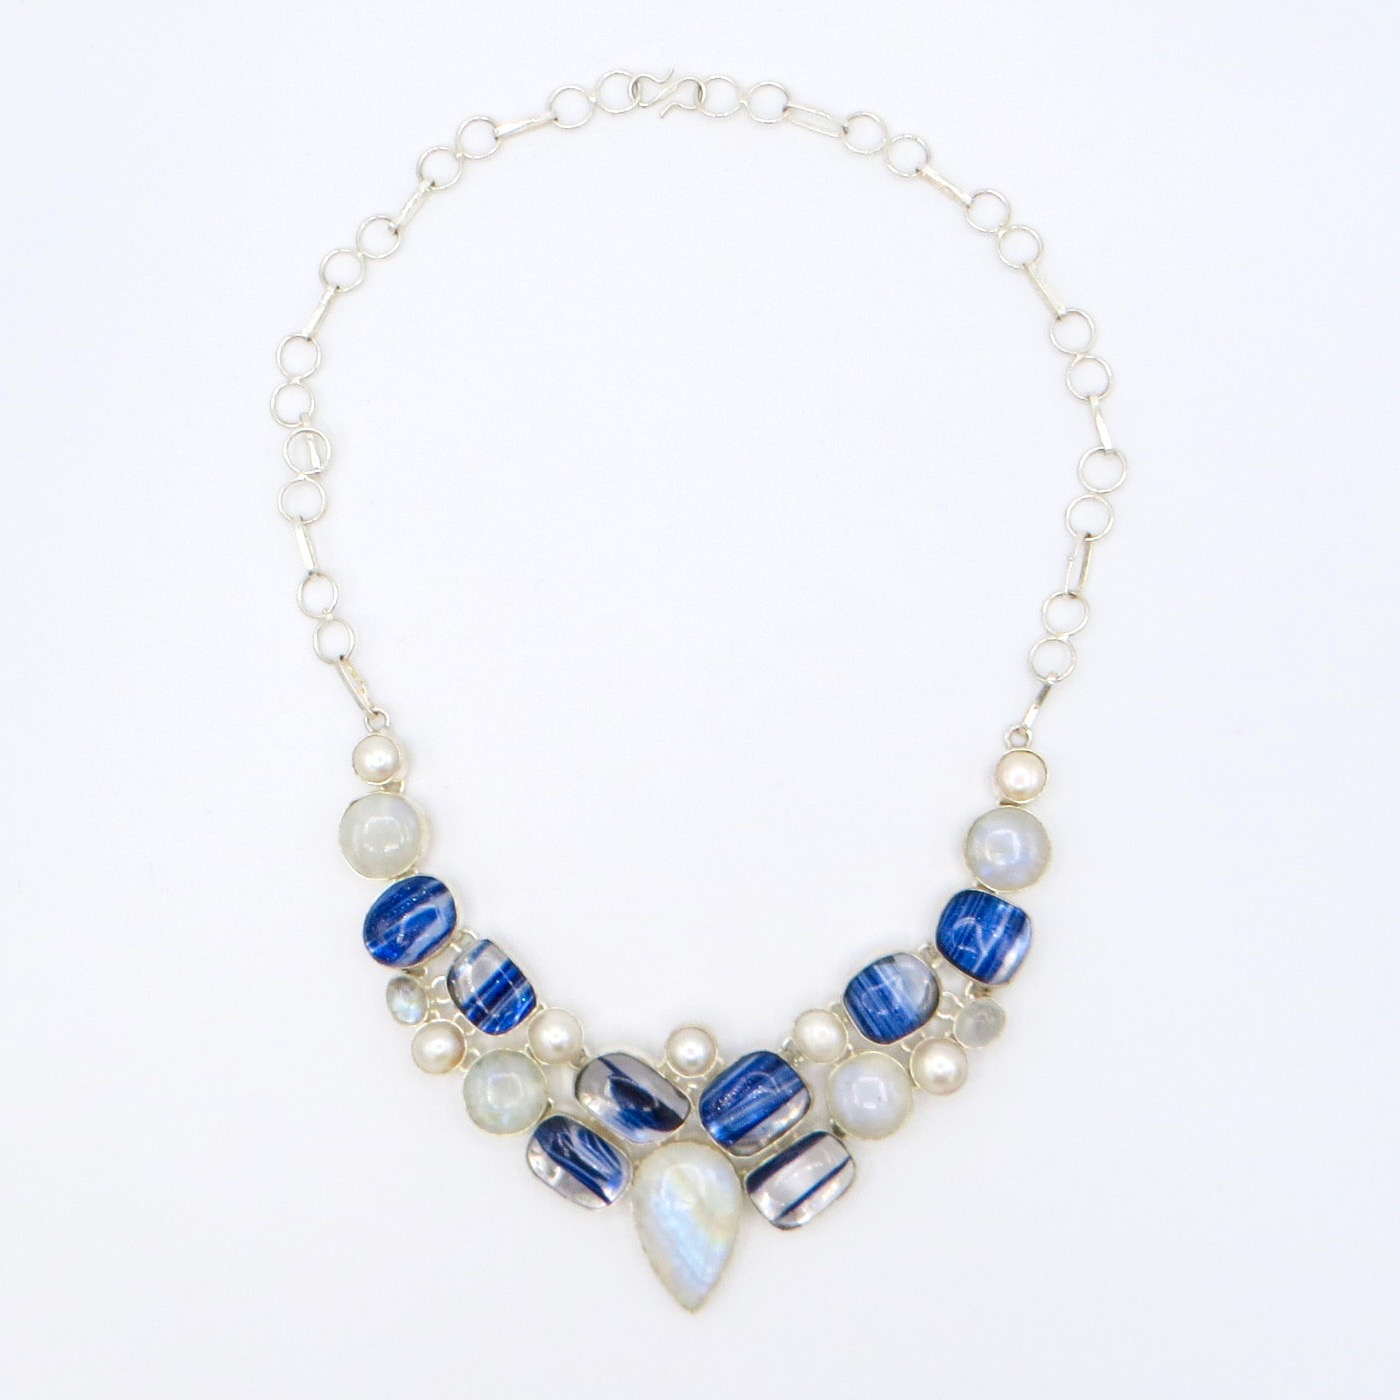 Moonstone and Murano Glass Necklace